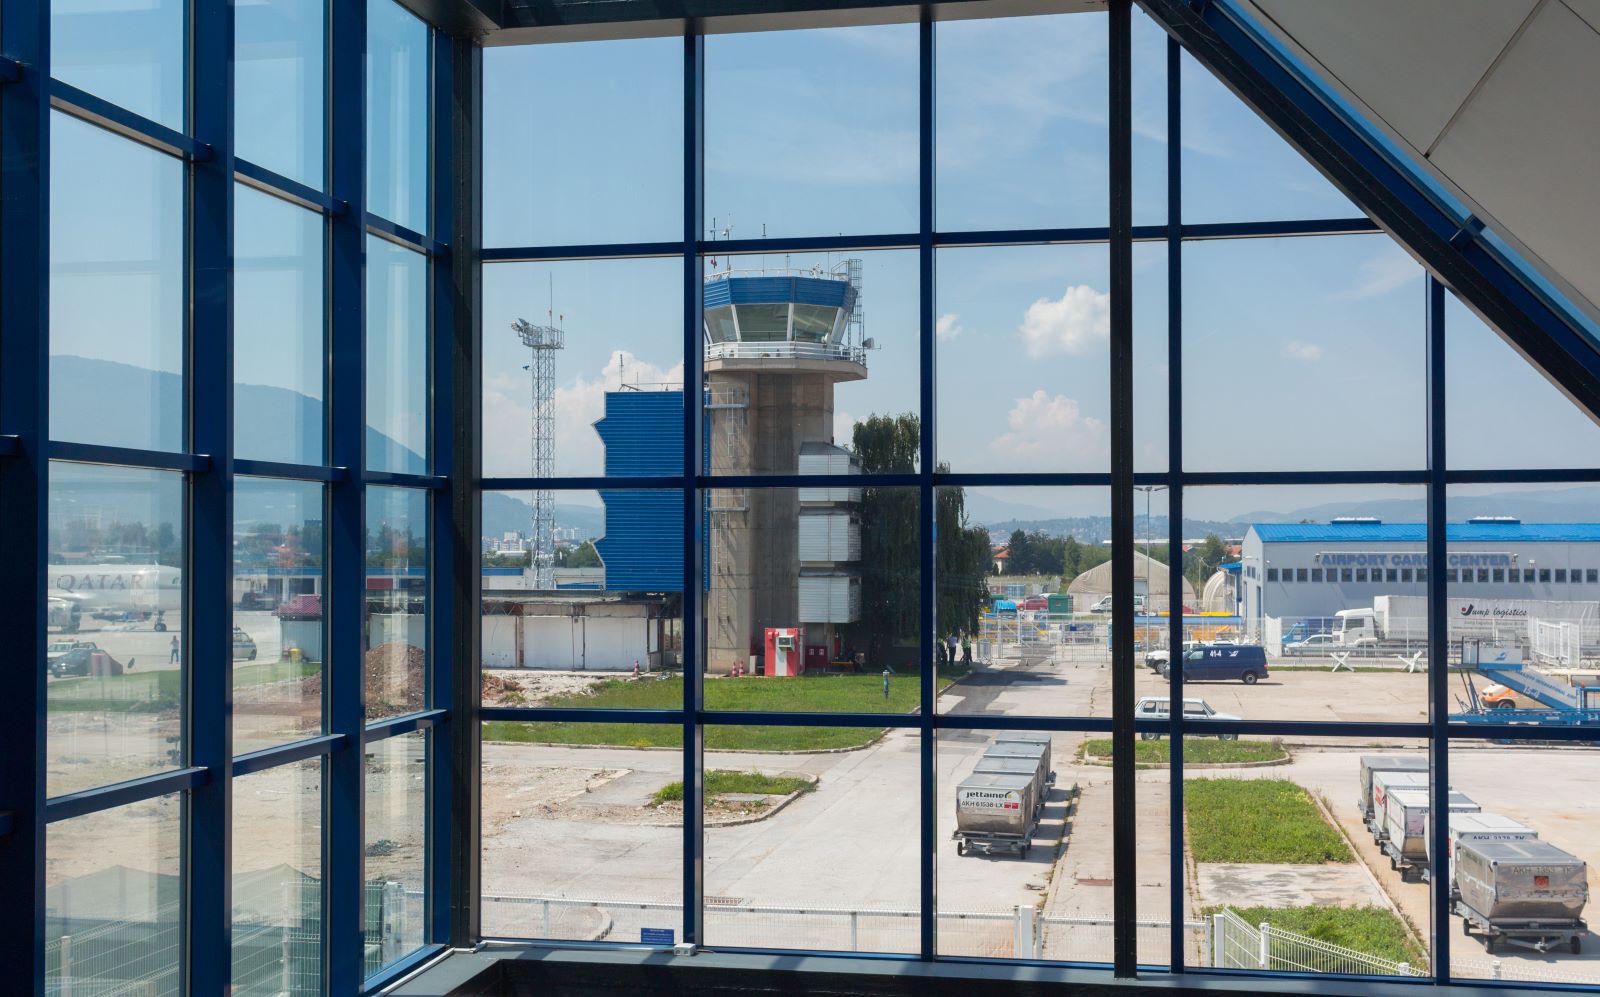 Sarajevo Airport serves as the main airport in the country and is a growing hub in the wider region, making it a logical next step as we continue to grow our market presence across the Balkans.